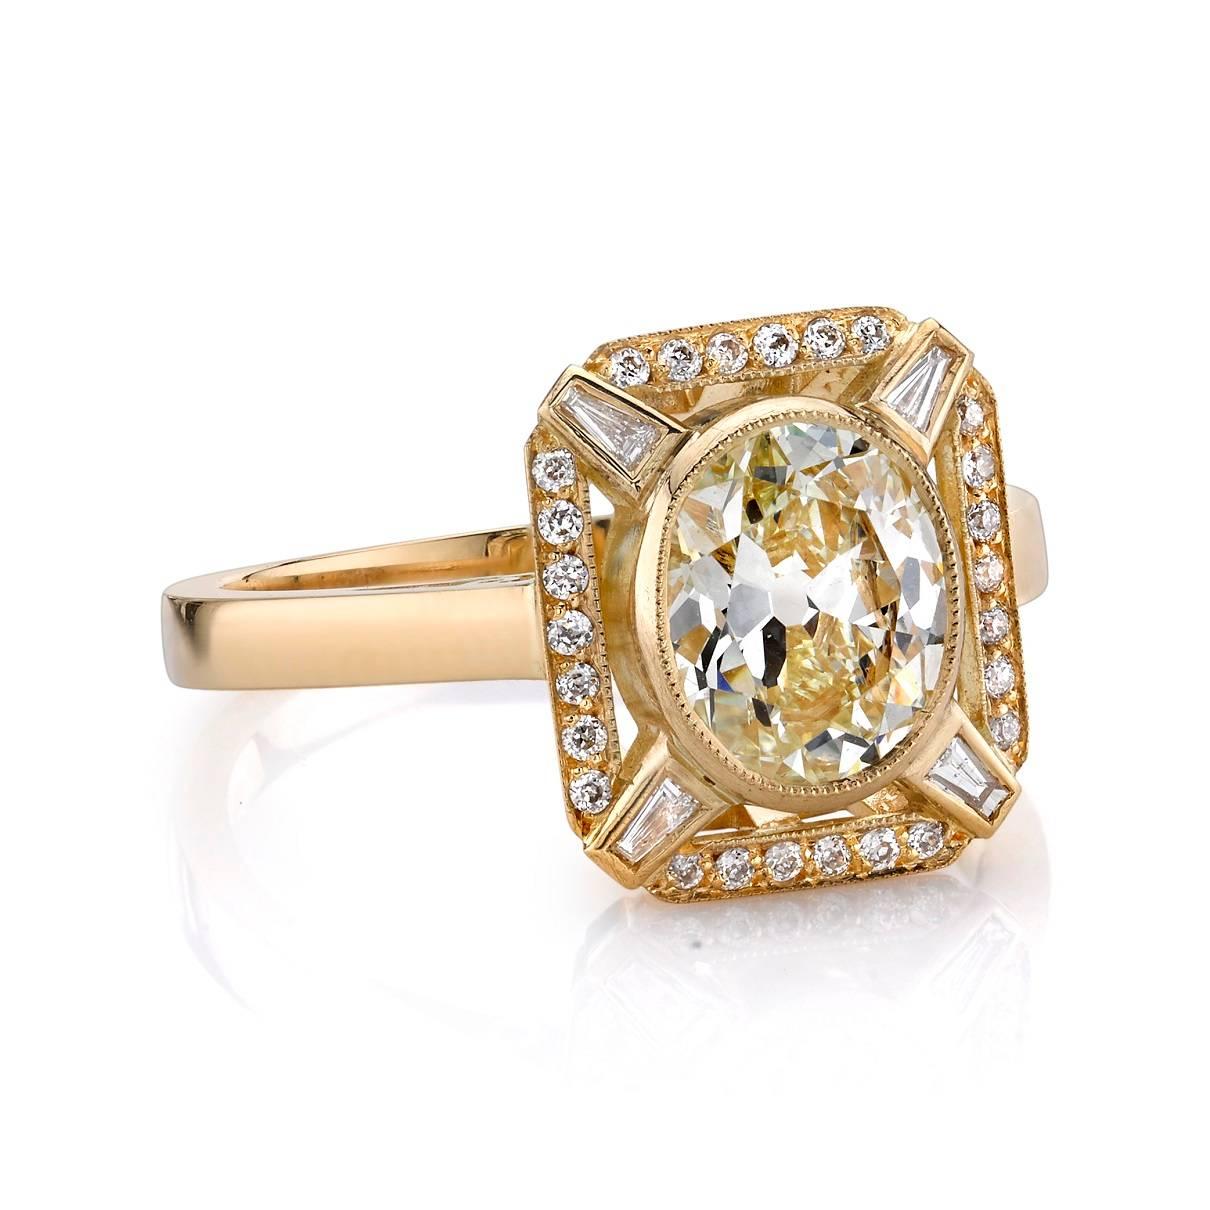 1.31ctw L/VS1 EGL certified antique oval cut diamond with 0.16ctw mixed cut diamonds set in a handcrafted 18K yellow gold mounting.  


